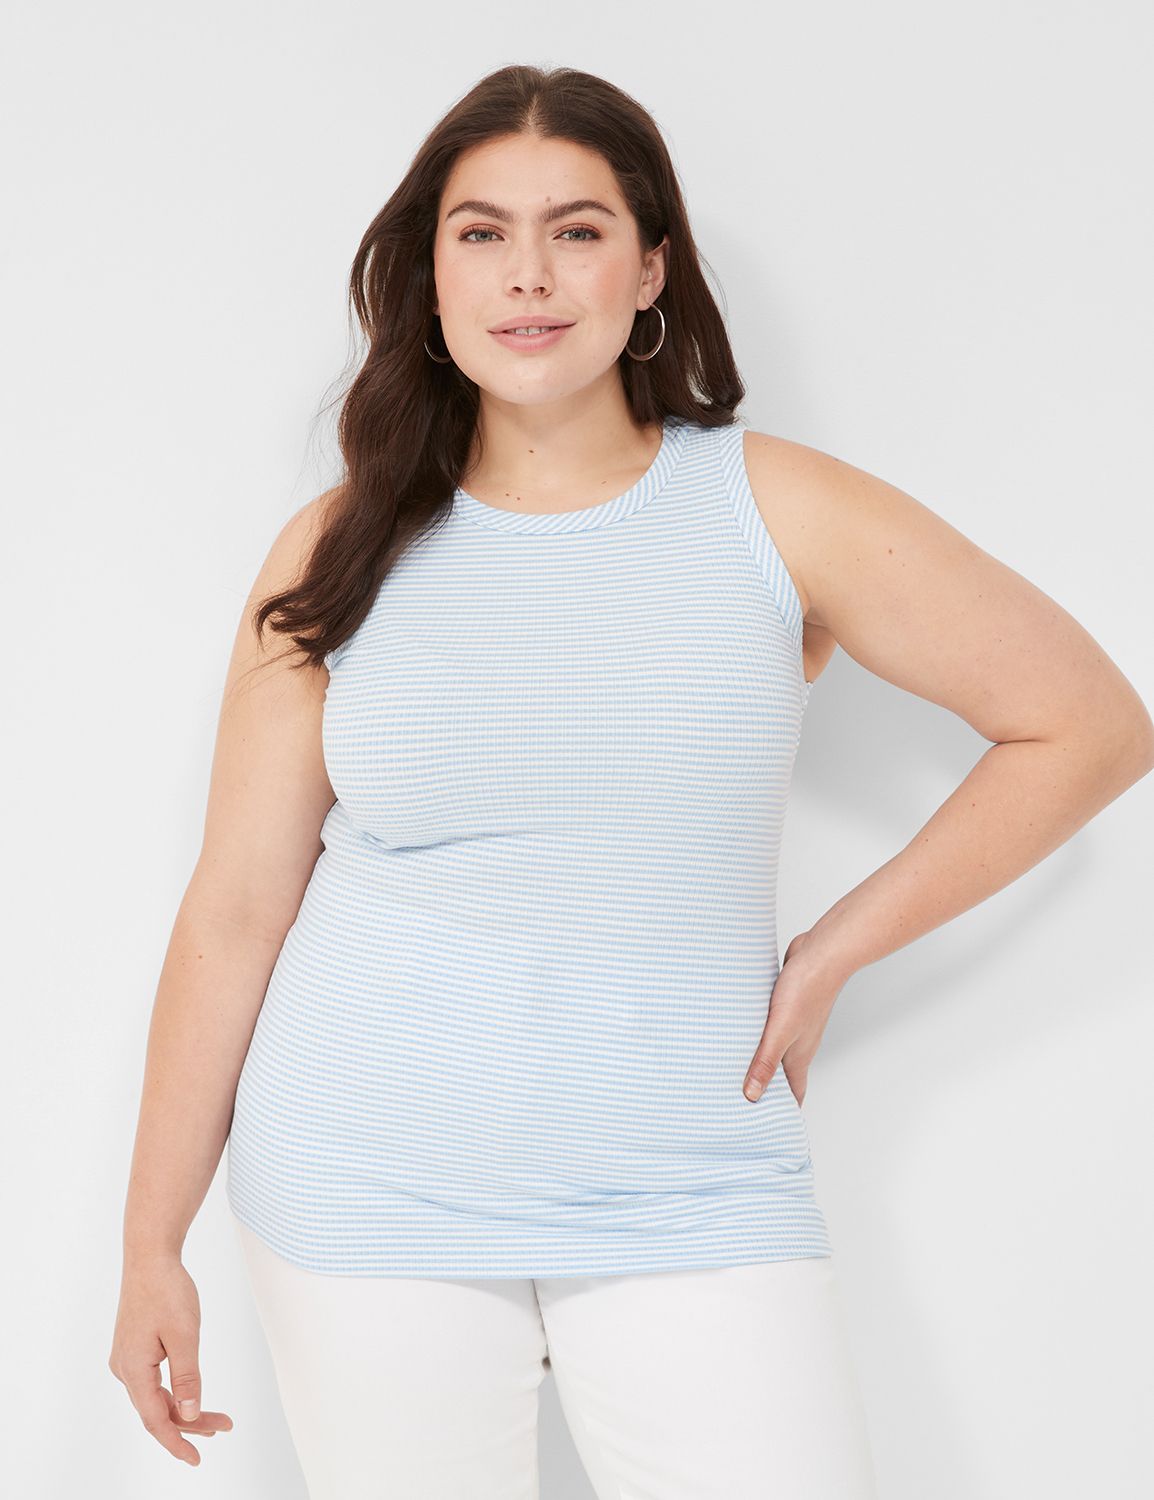 Levmjia Tank Tops For Women Plus Size Sleeveless Clearance Fashion